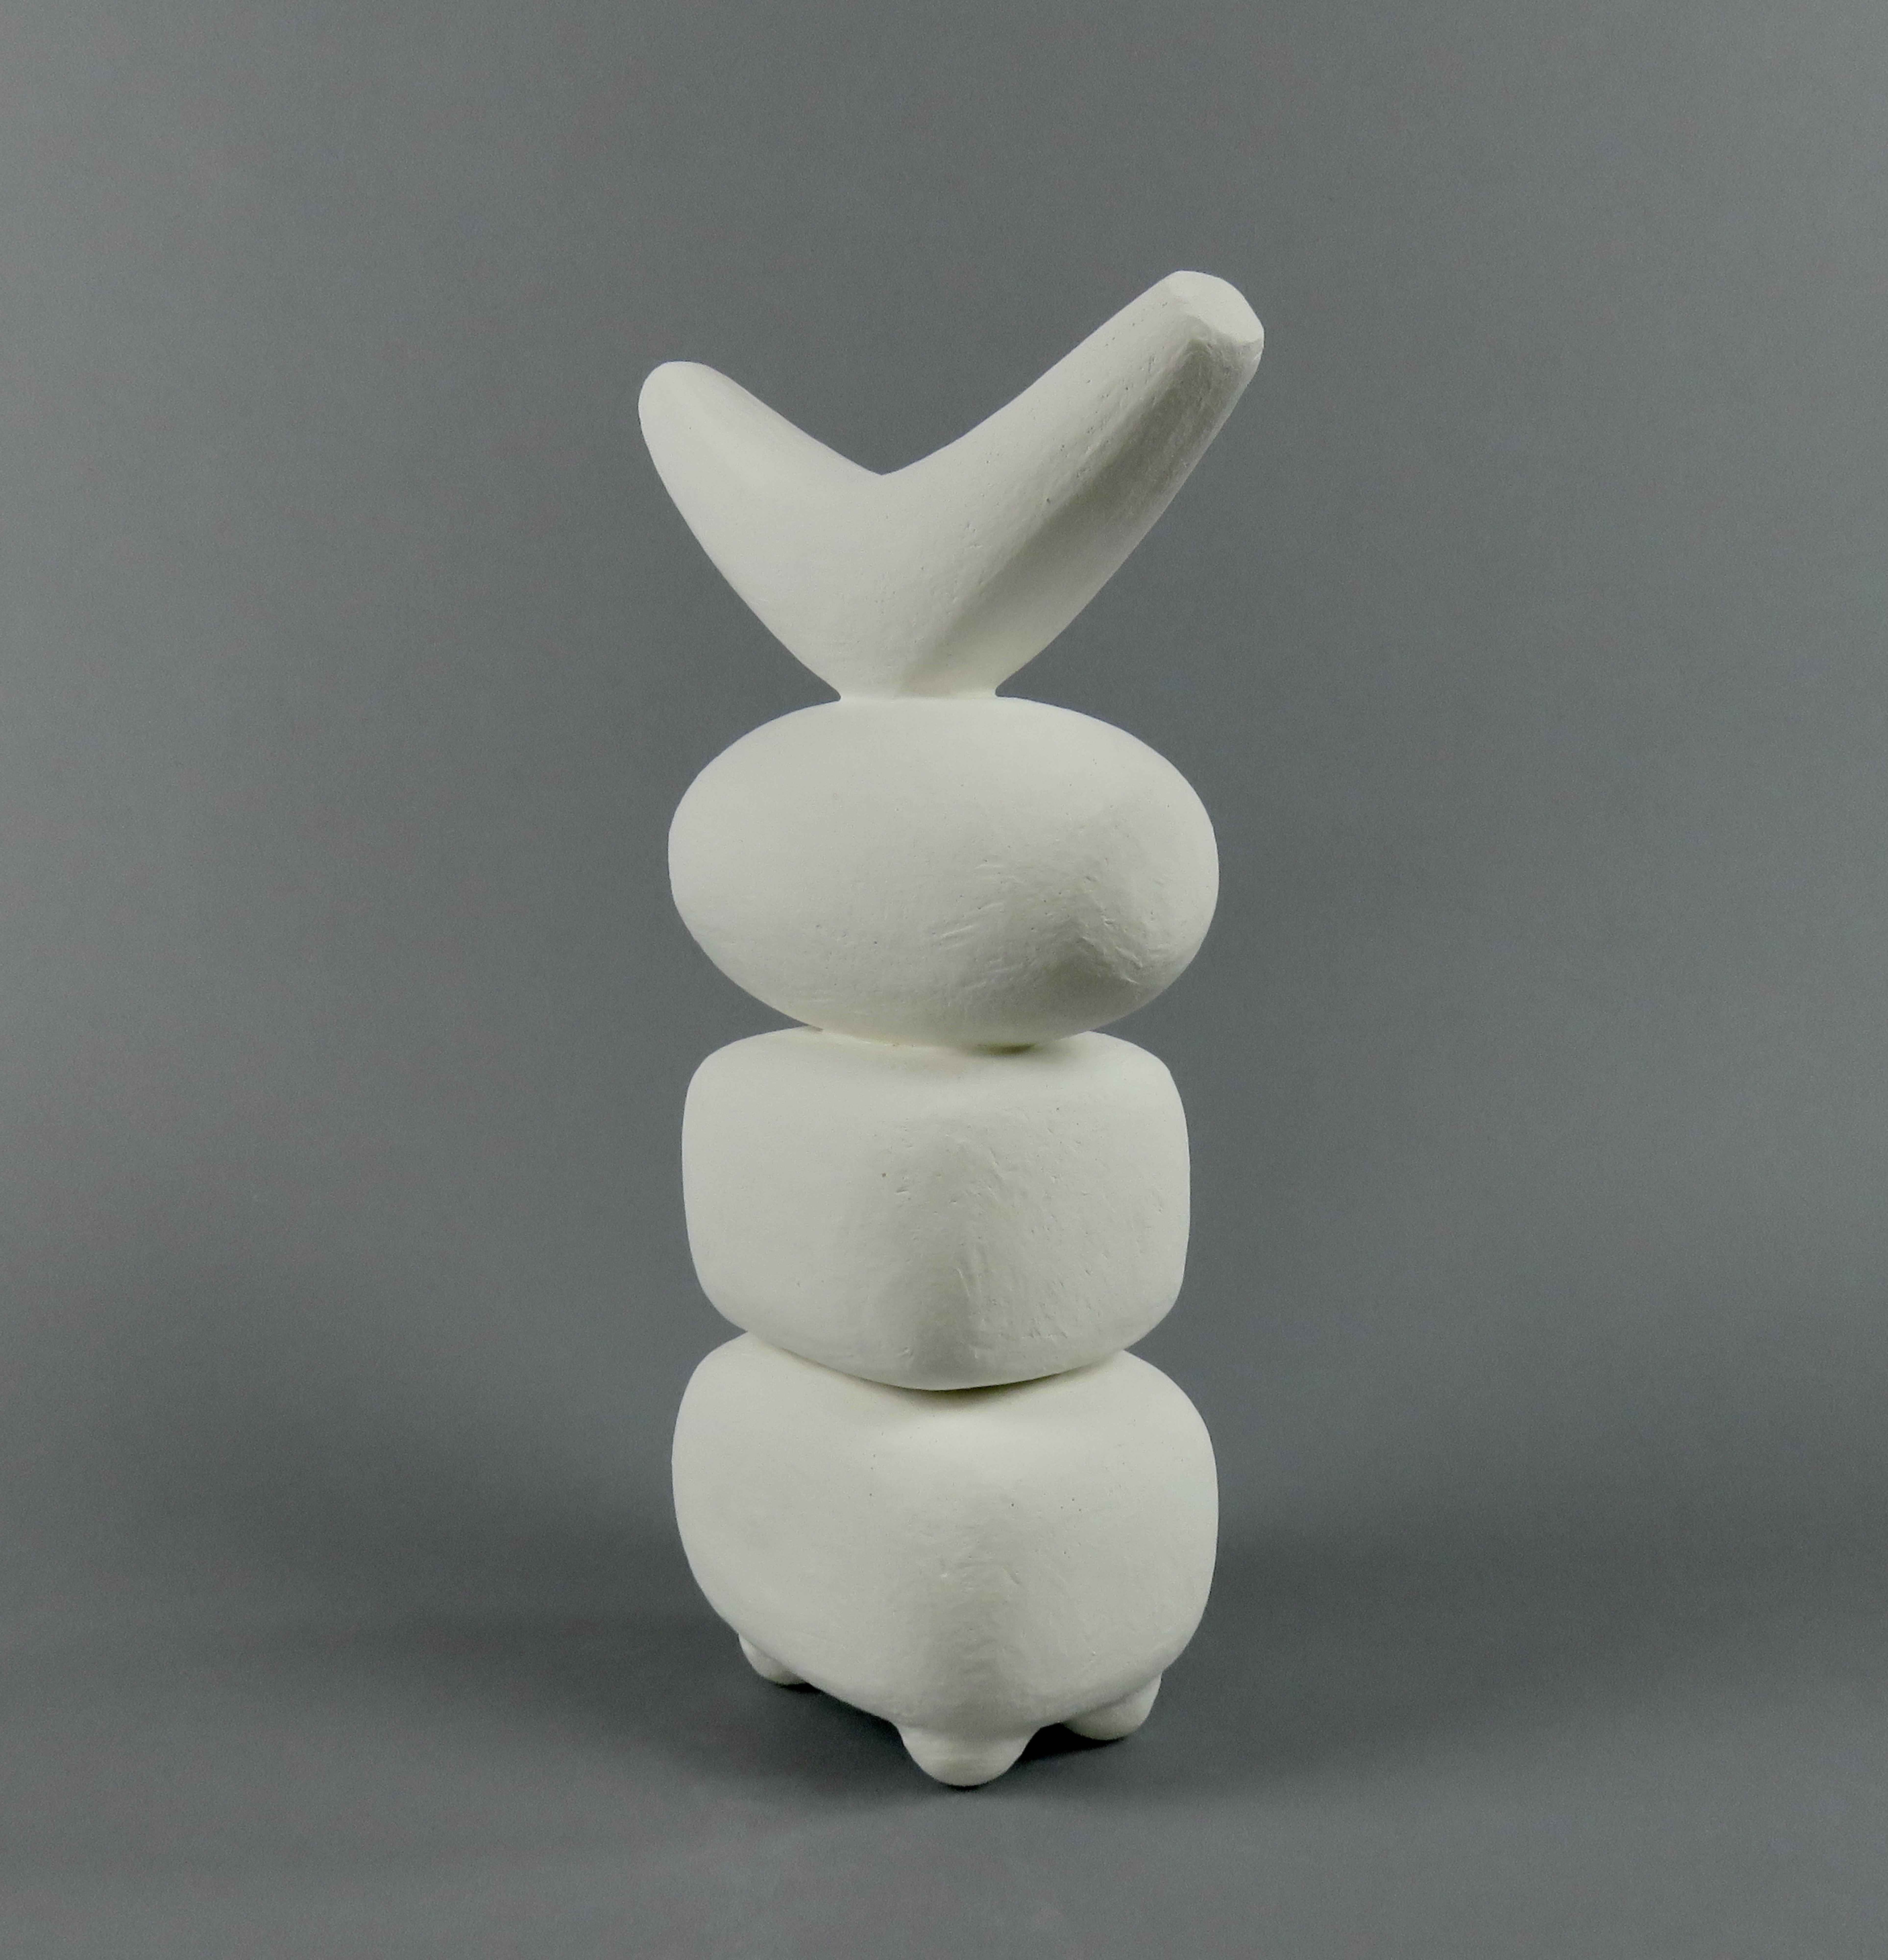 American White Winged Crown, 4 Part Ceramic TOTEM, Hand Built Sculpture by H. Starcevic For Sale